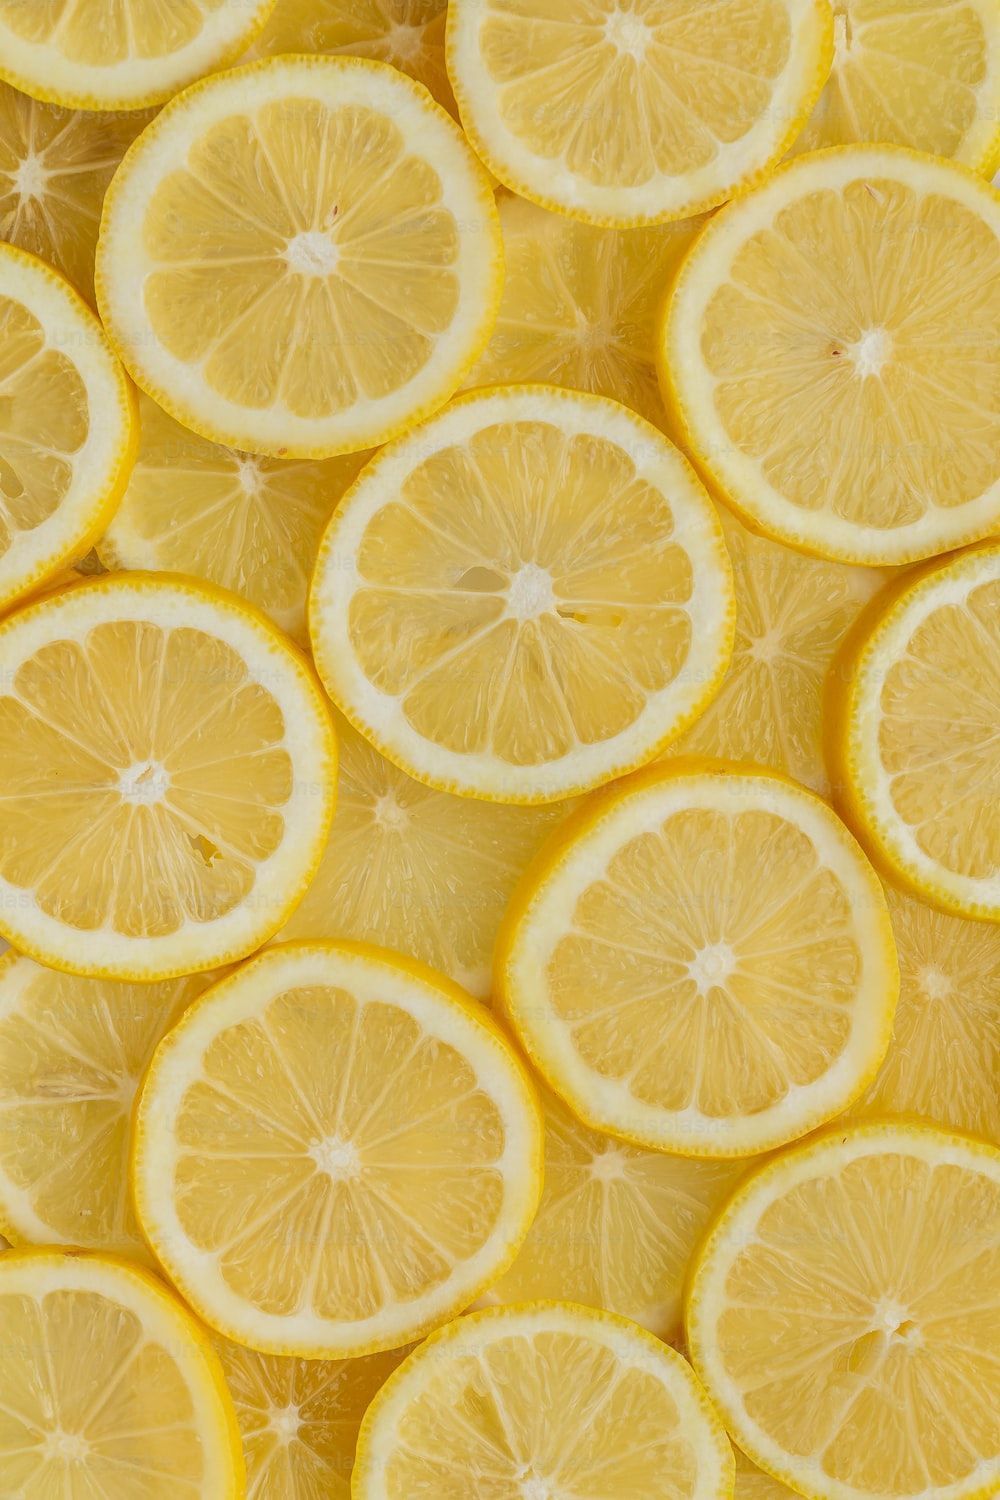 A bunch of lemons that are cut in half photo